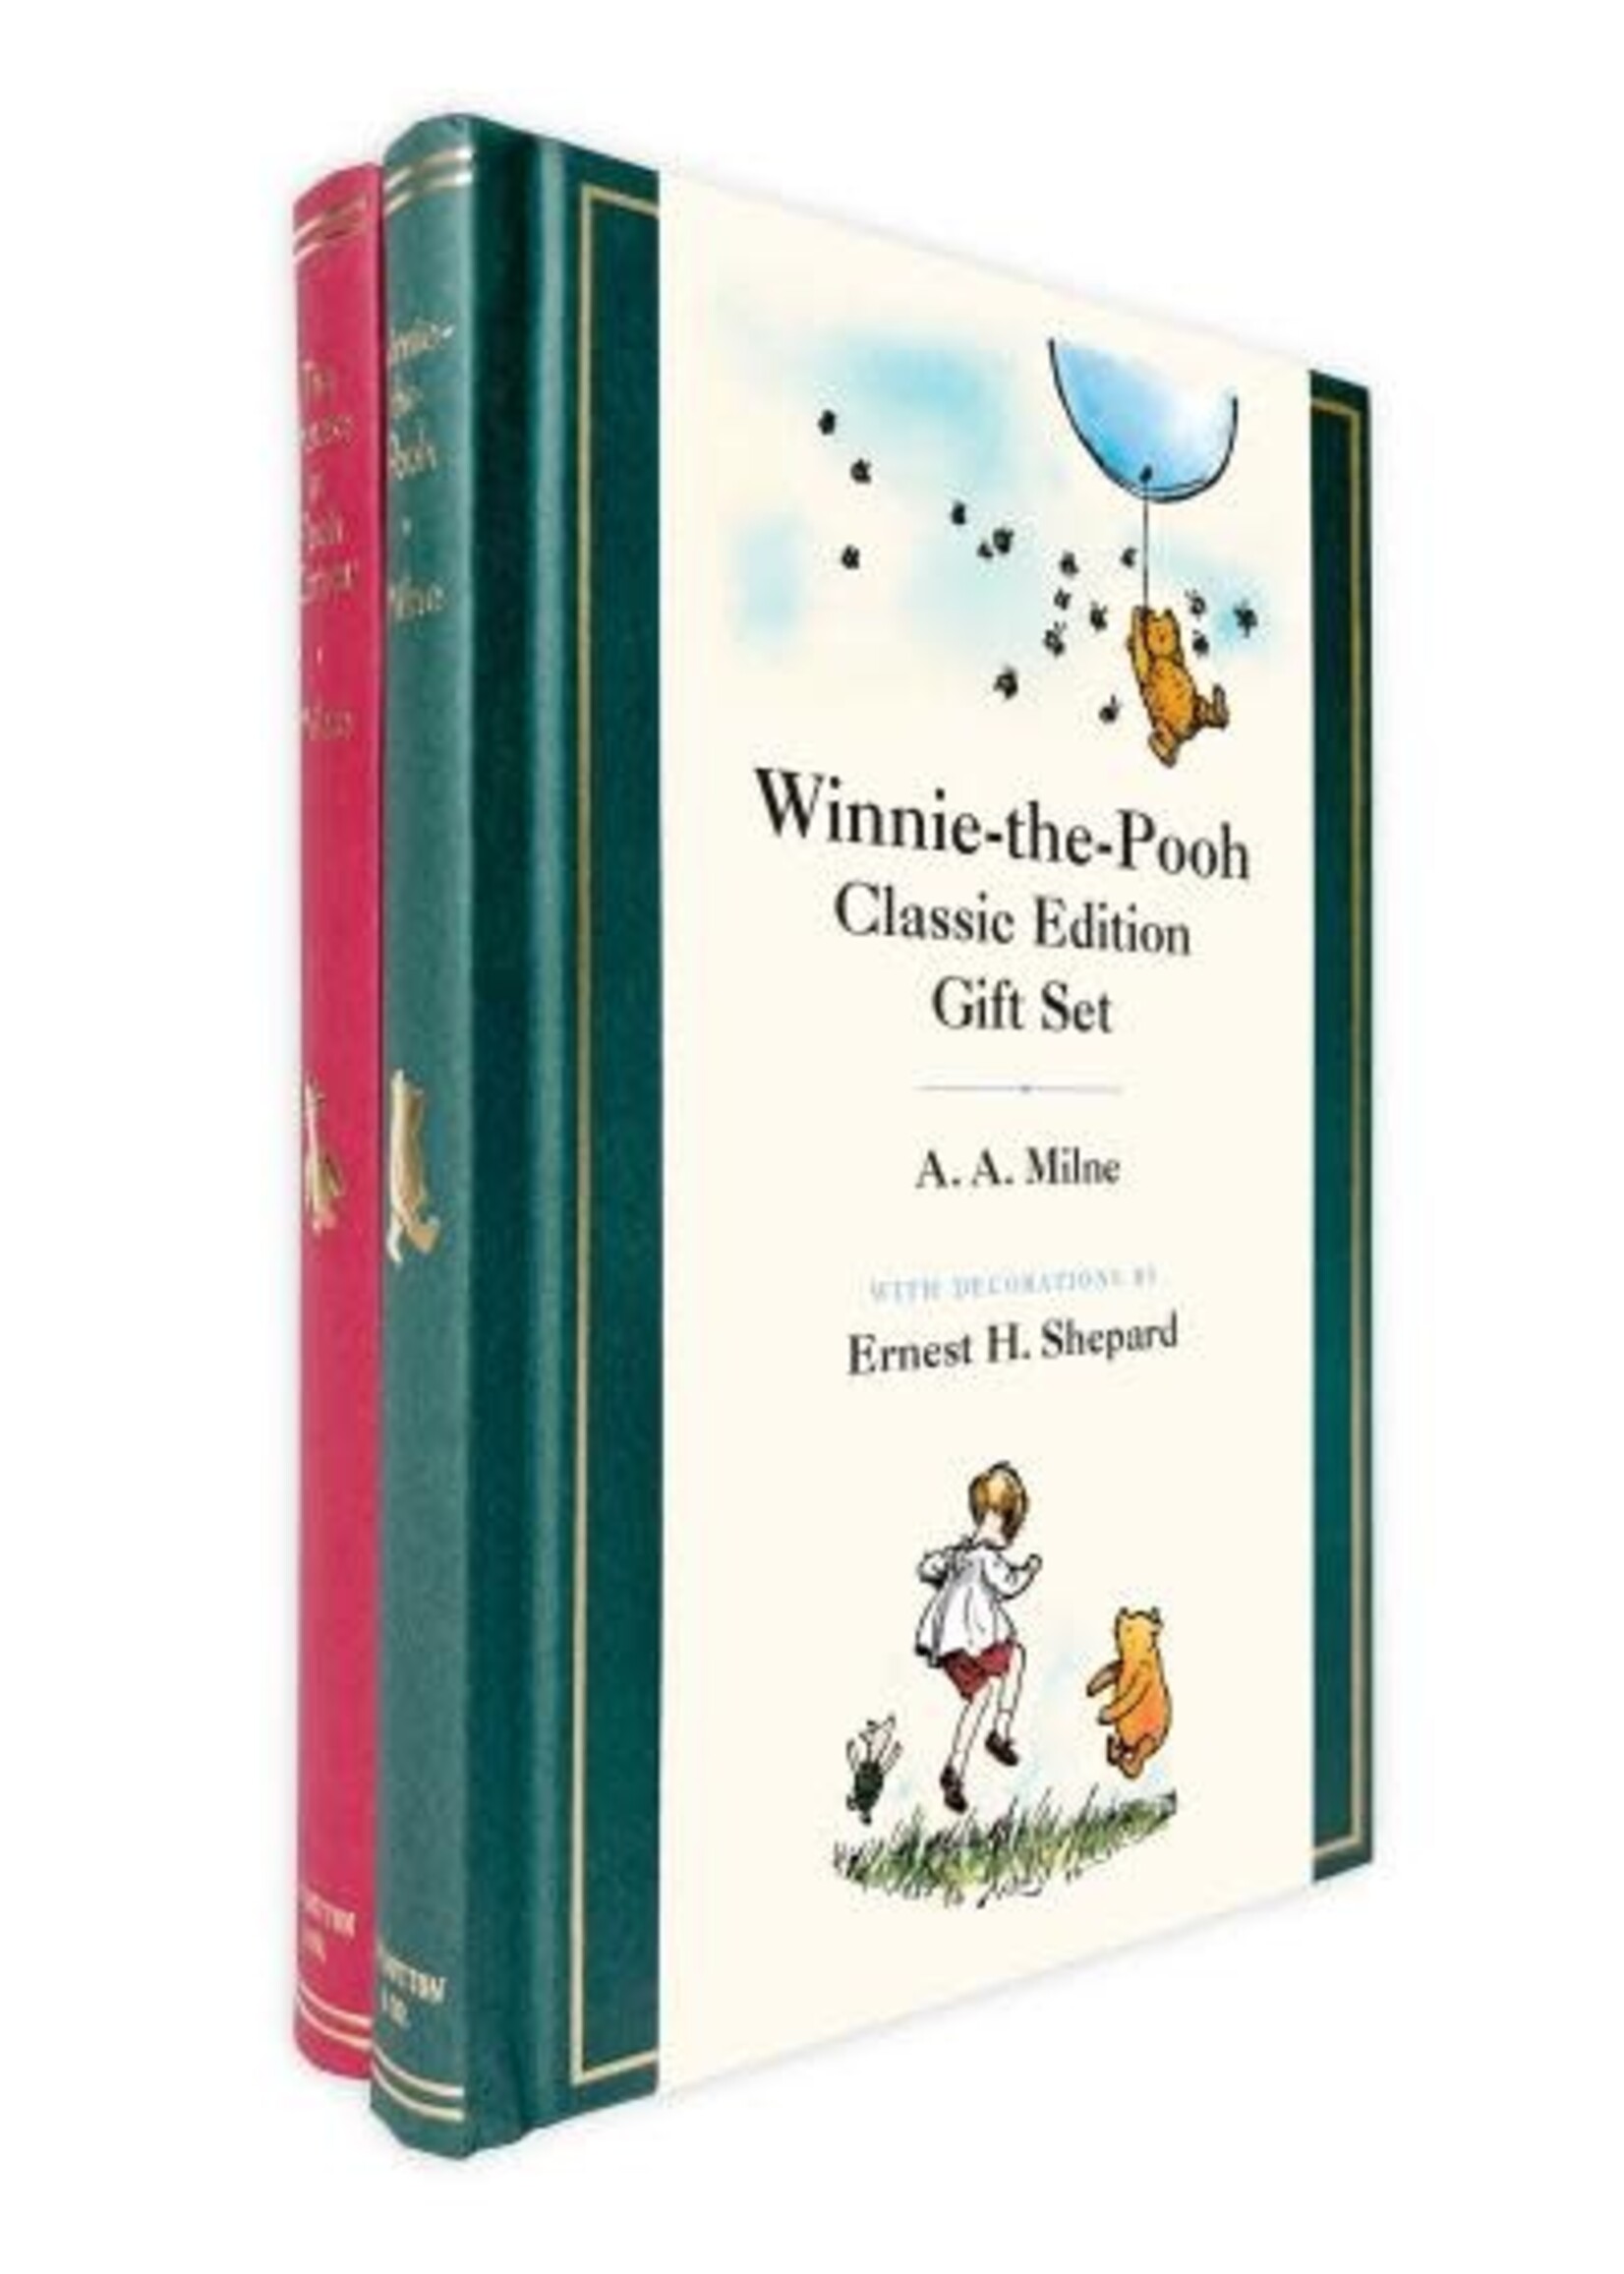 Winnie-the-Pooh Classic Edition Gift Set by A. A. Milne, Ernest H. Shepard